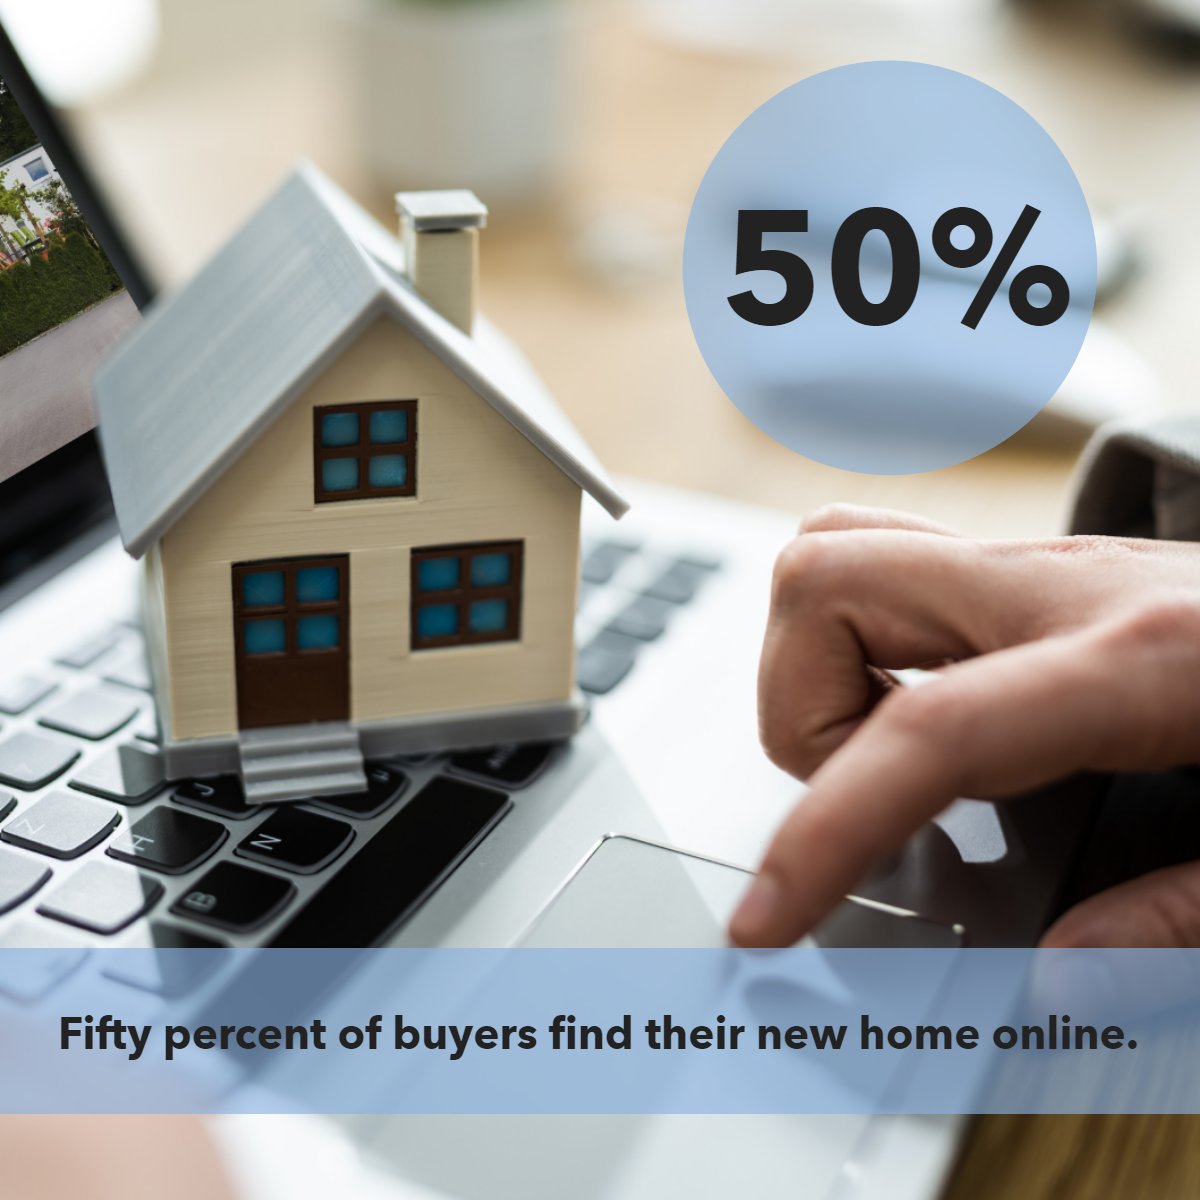 And I am pretty sure this number will only go up in the future! 📈

#funfacts #online #buyers #buyingonline #homesearch #househunting